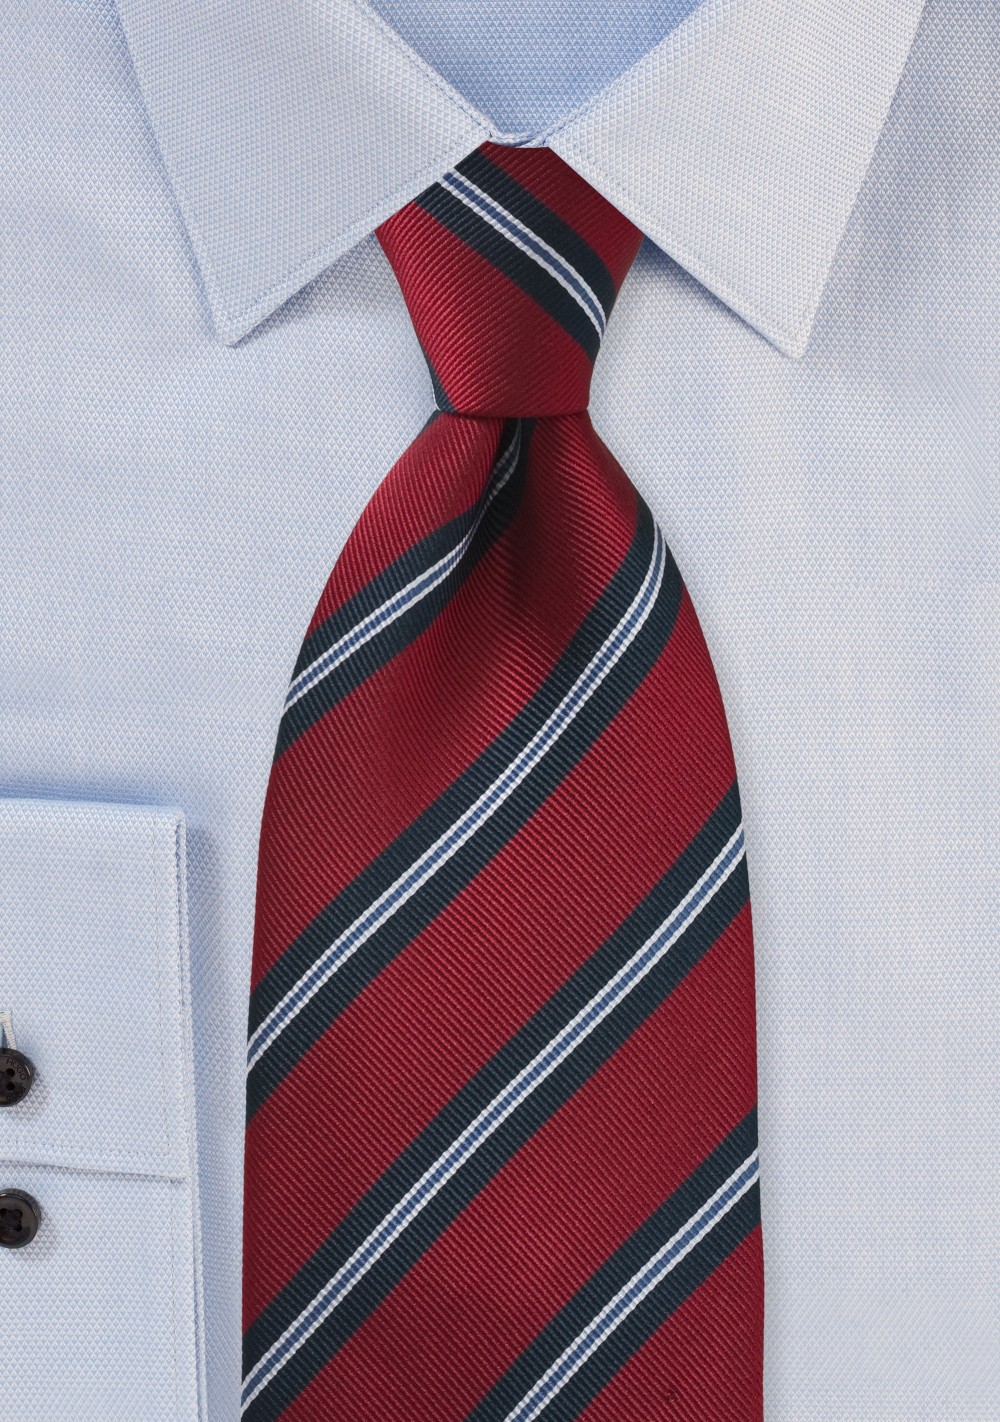 XL Length Regimental Tie in Red and Navy Blue